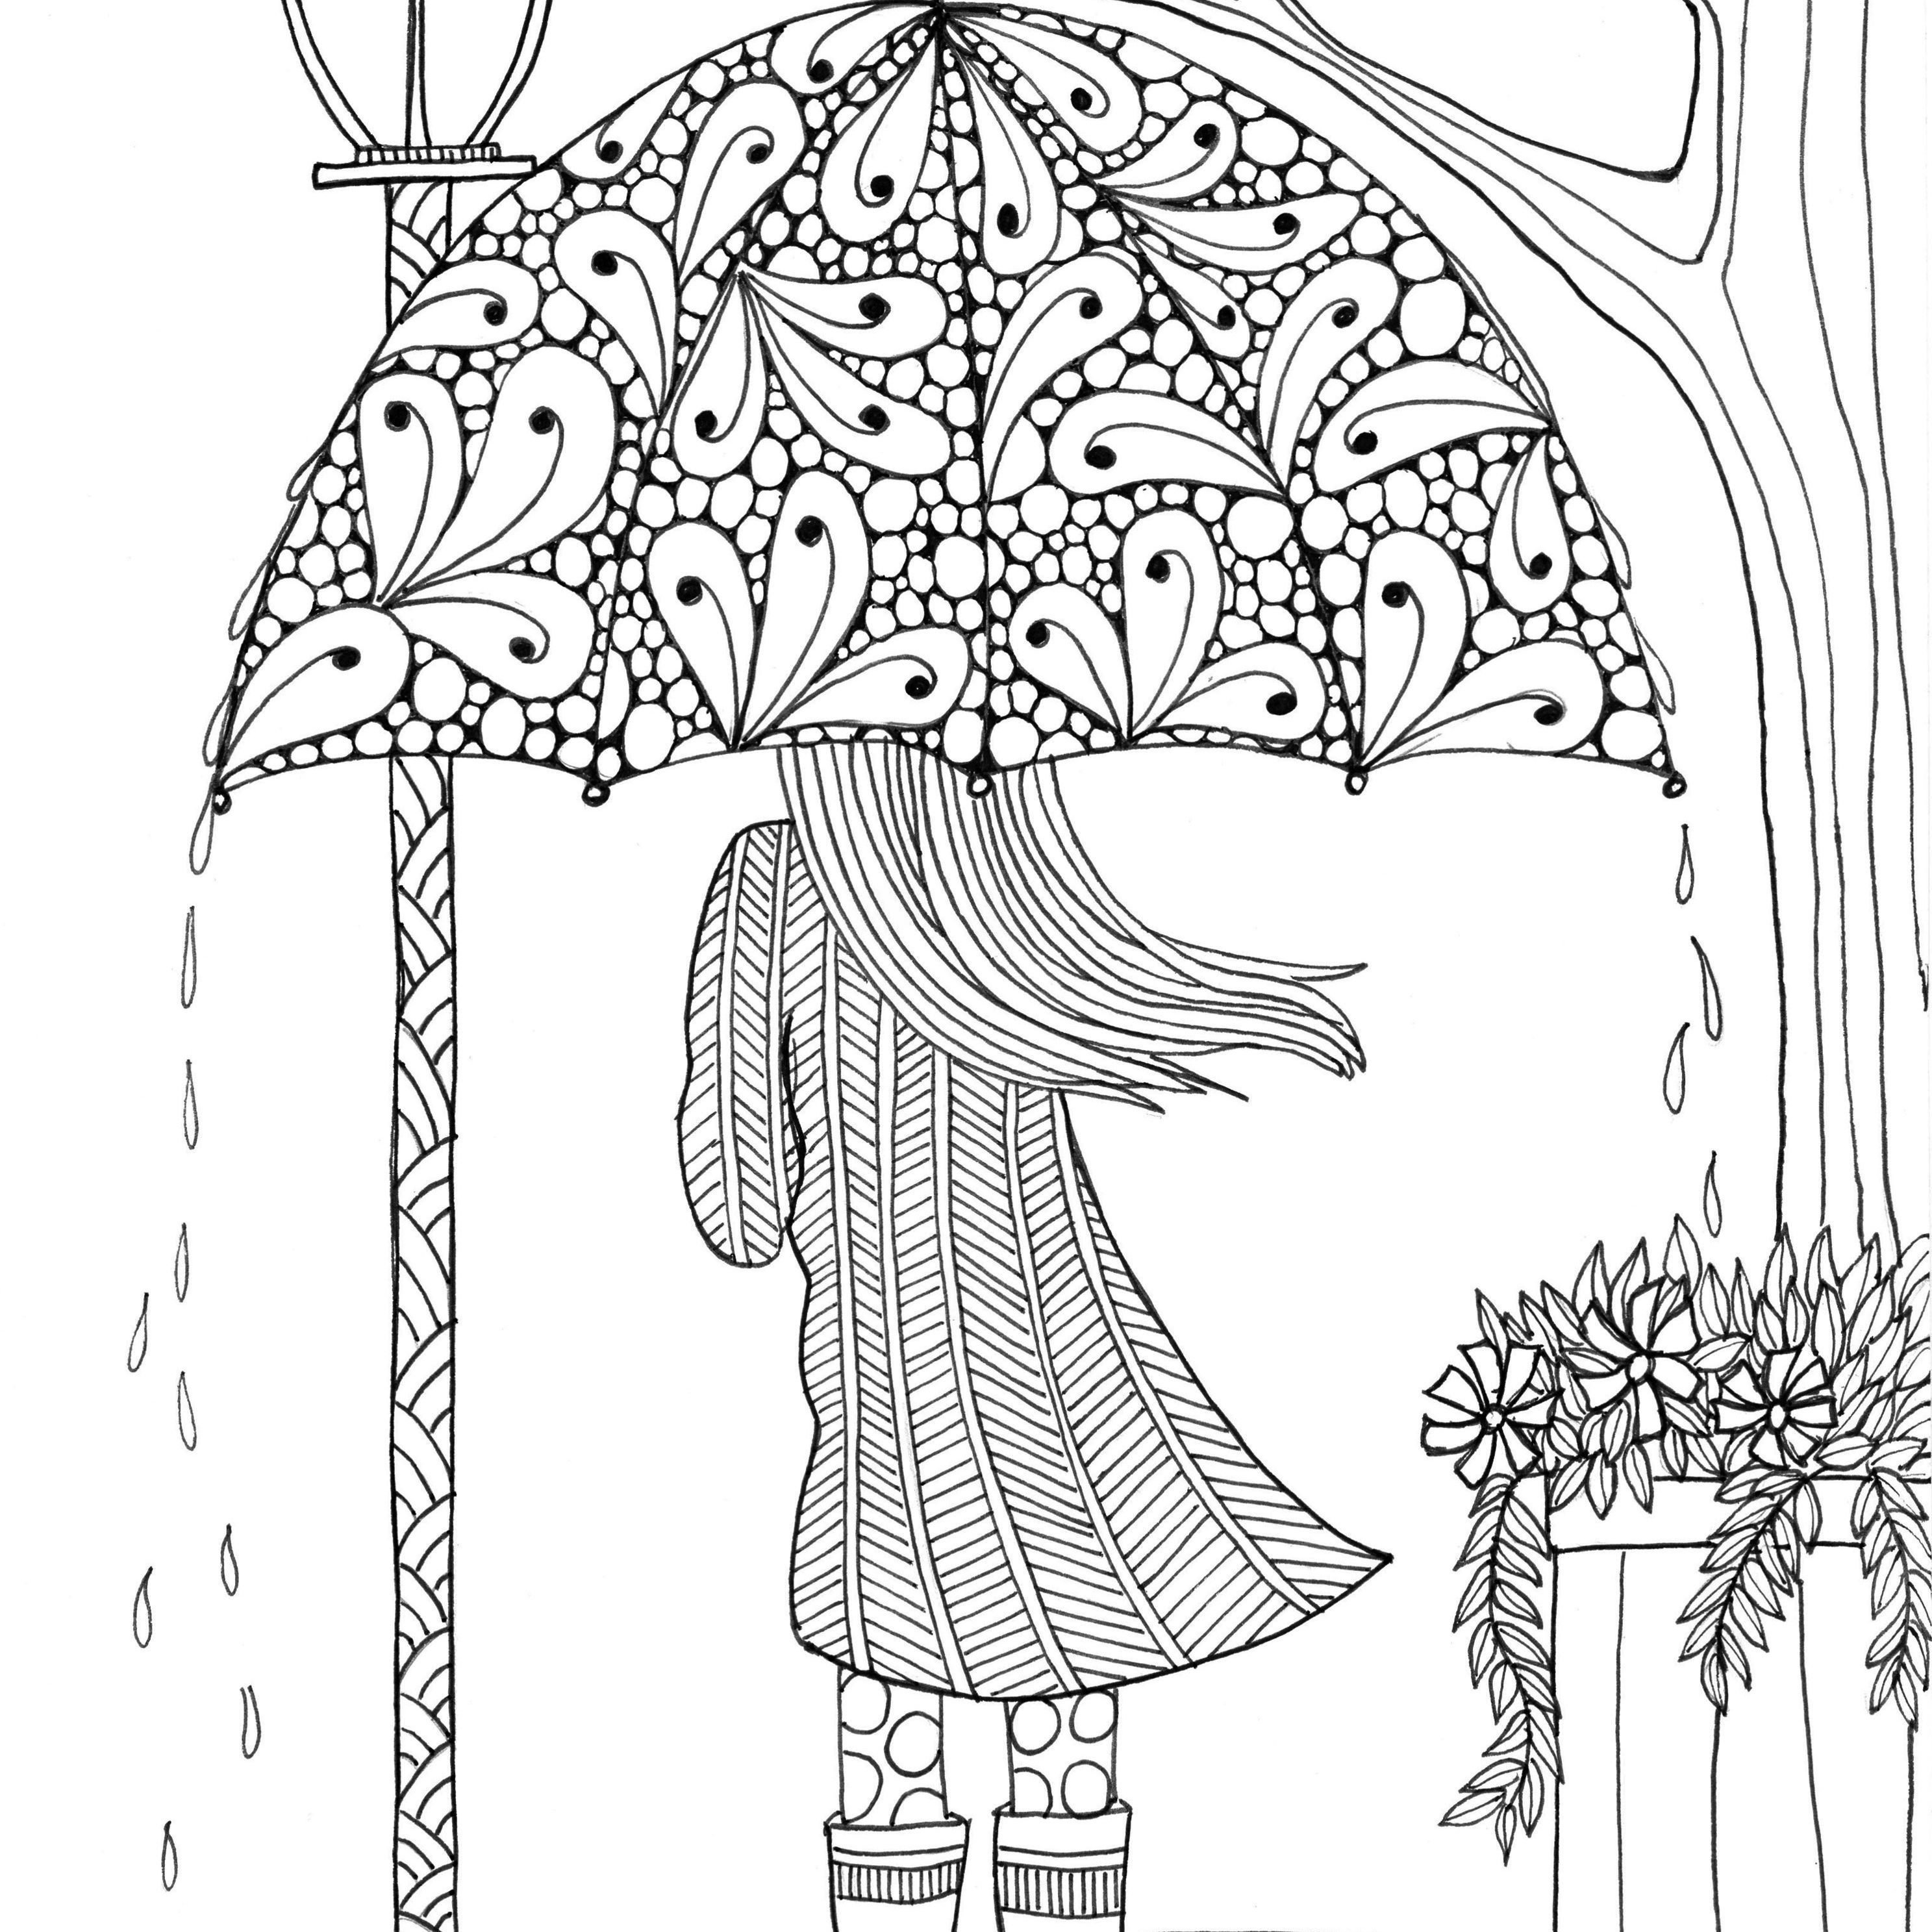 Free, Printable Coloring Pages For Adults - Free Printable Coloring Books For Adults